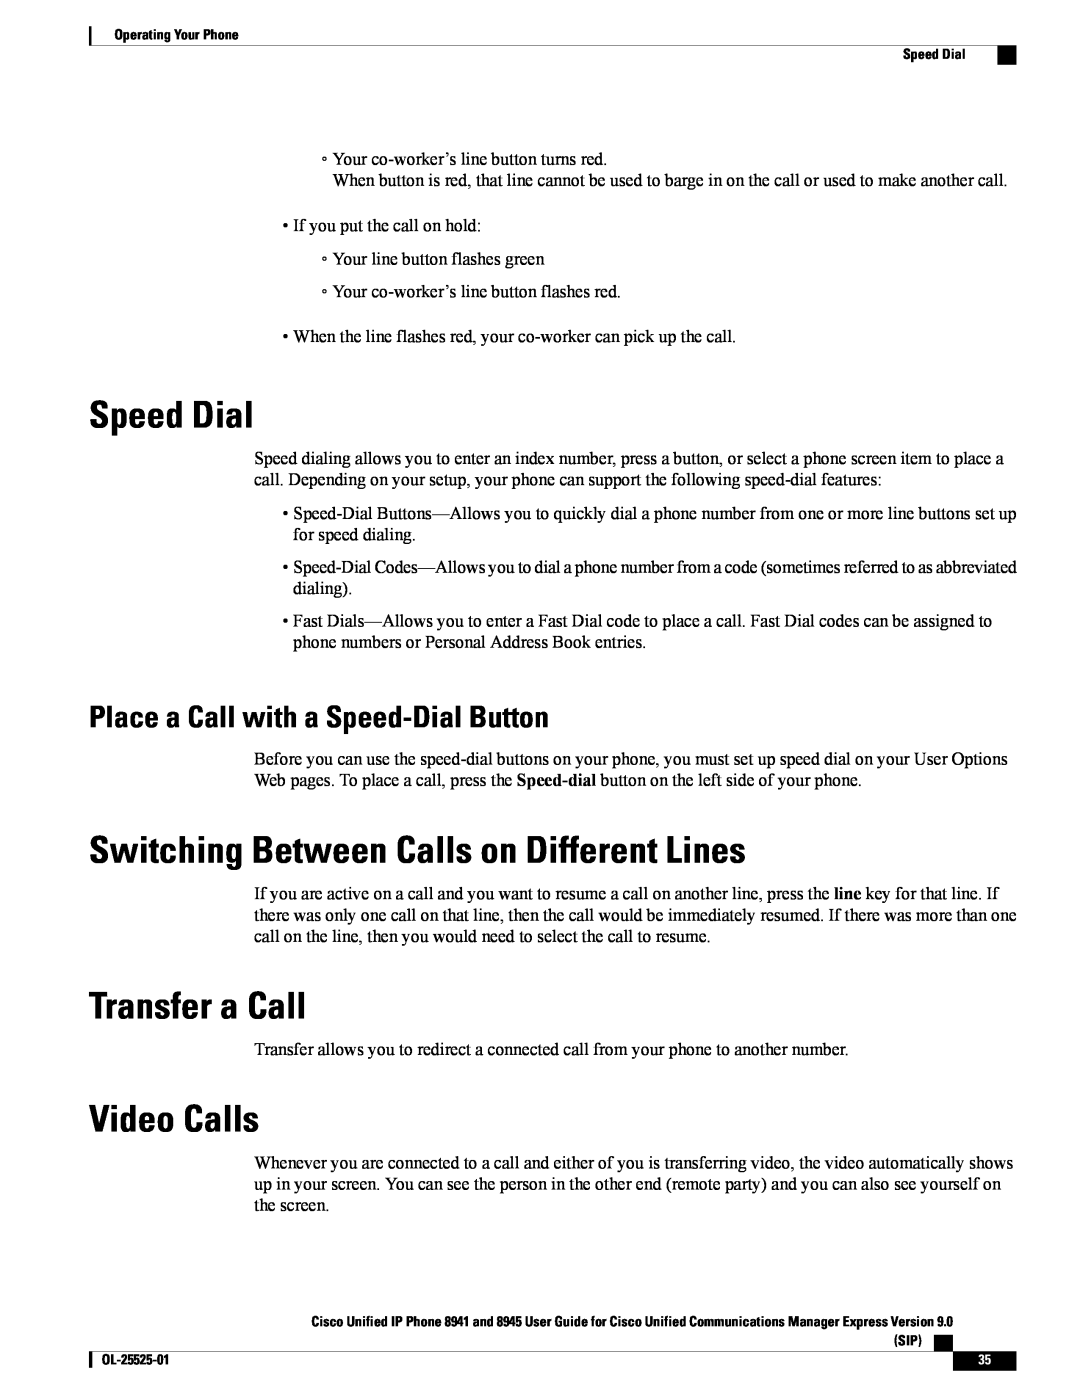 Cisco Systems 8945, 8941 manual Speed Dial, Switching Between Calls on Different Lines, Transfer a Call, Video Calls 